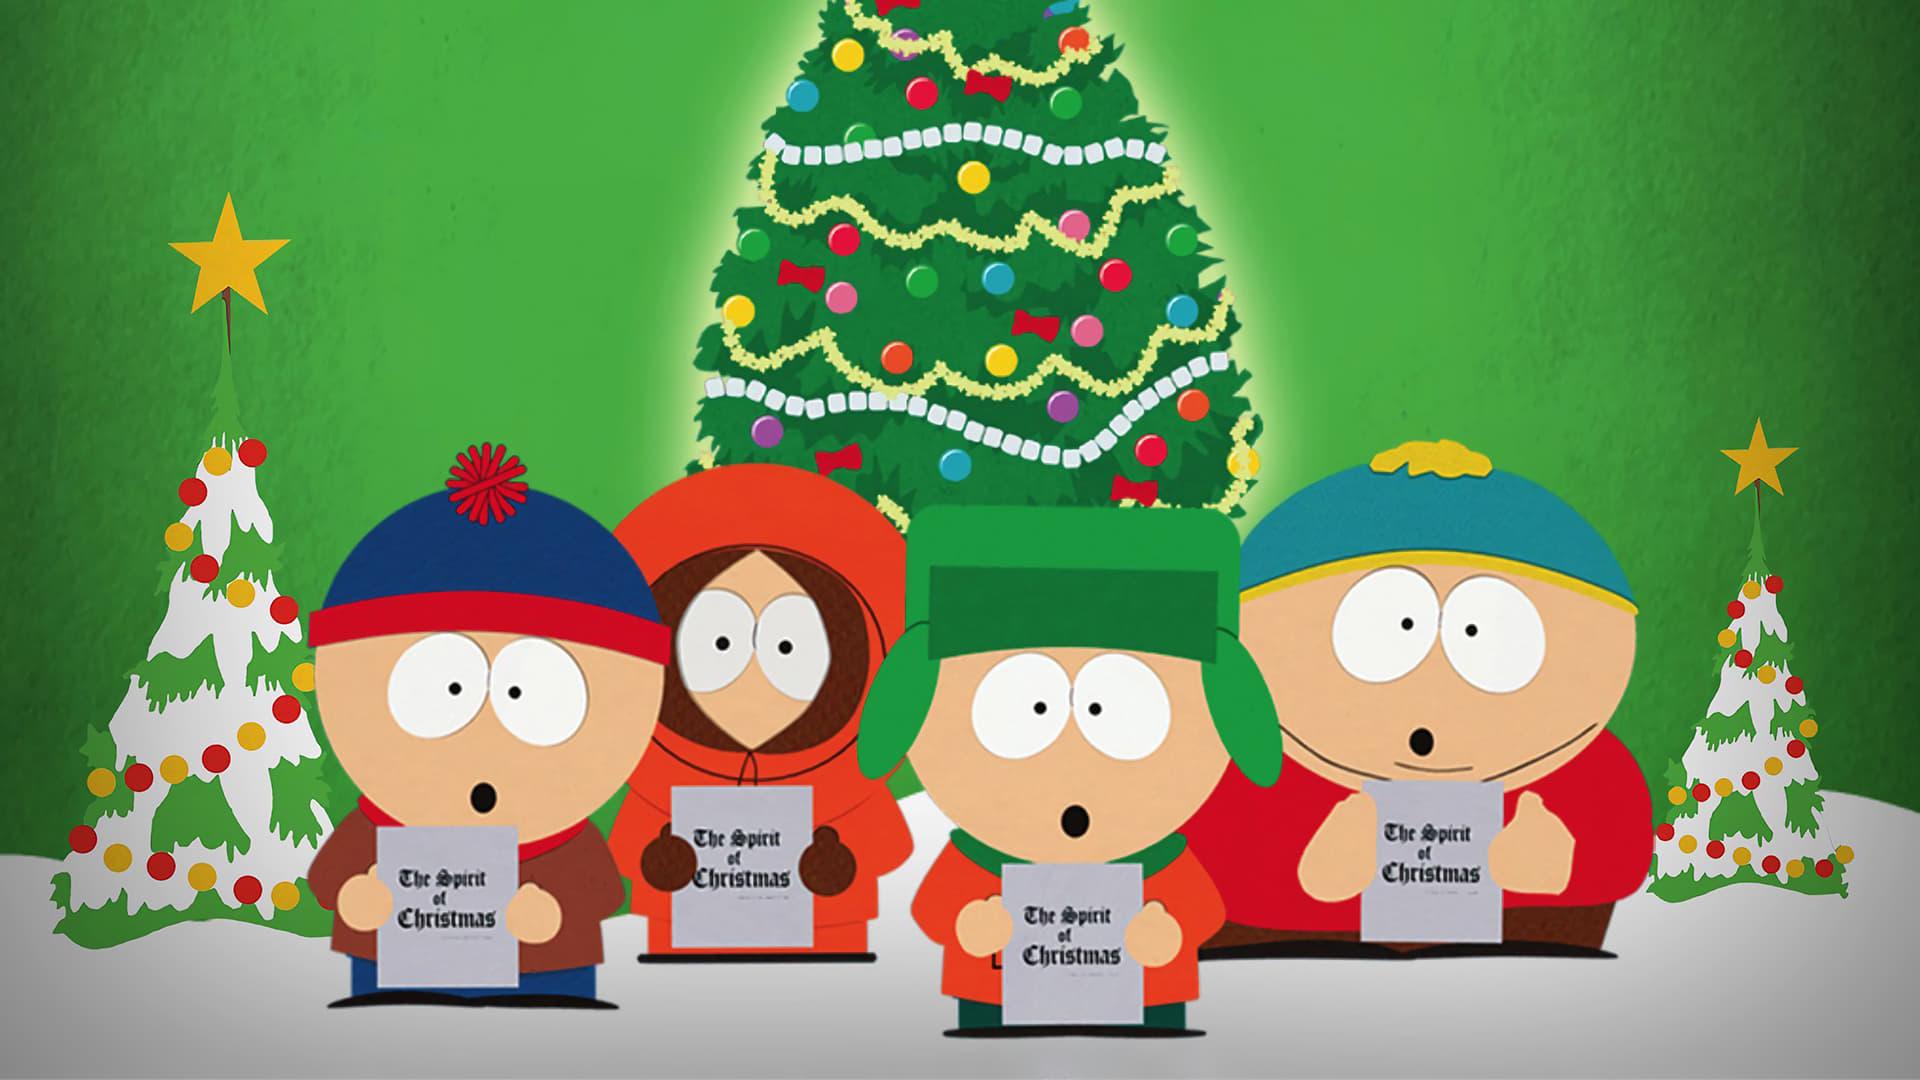 Christmas Time in South Park backdrop